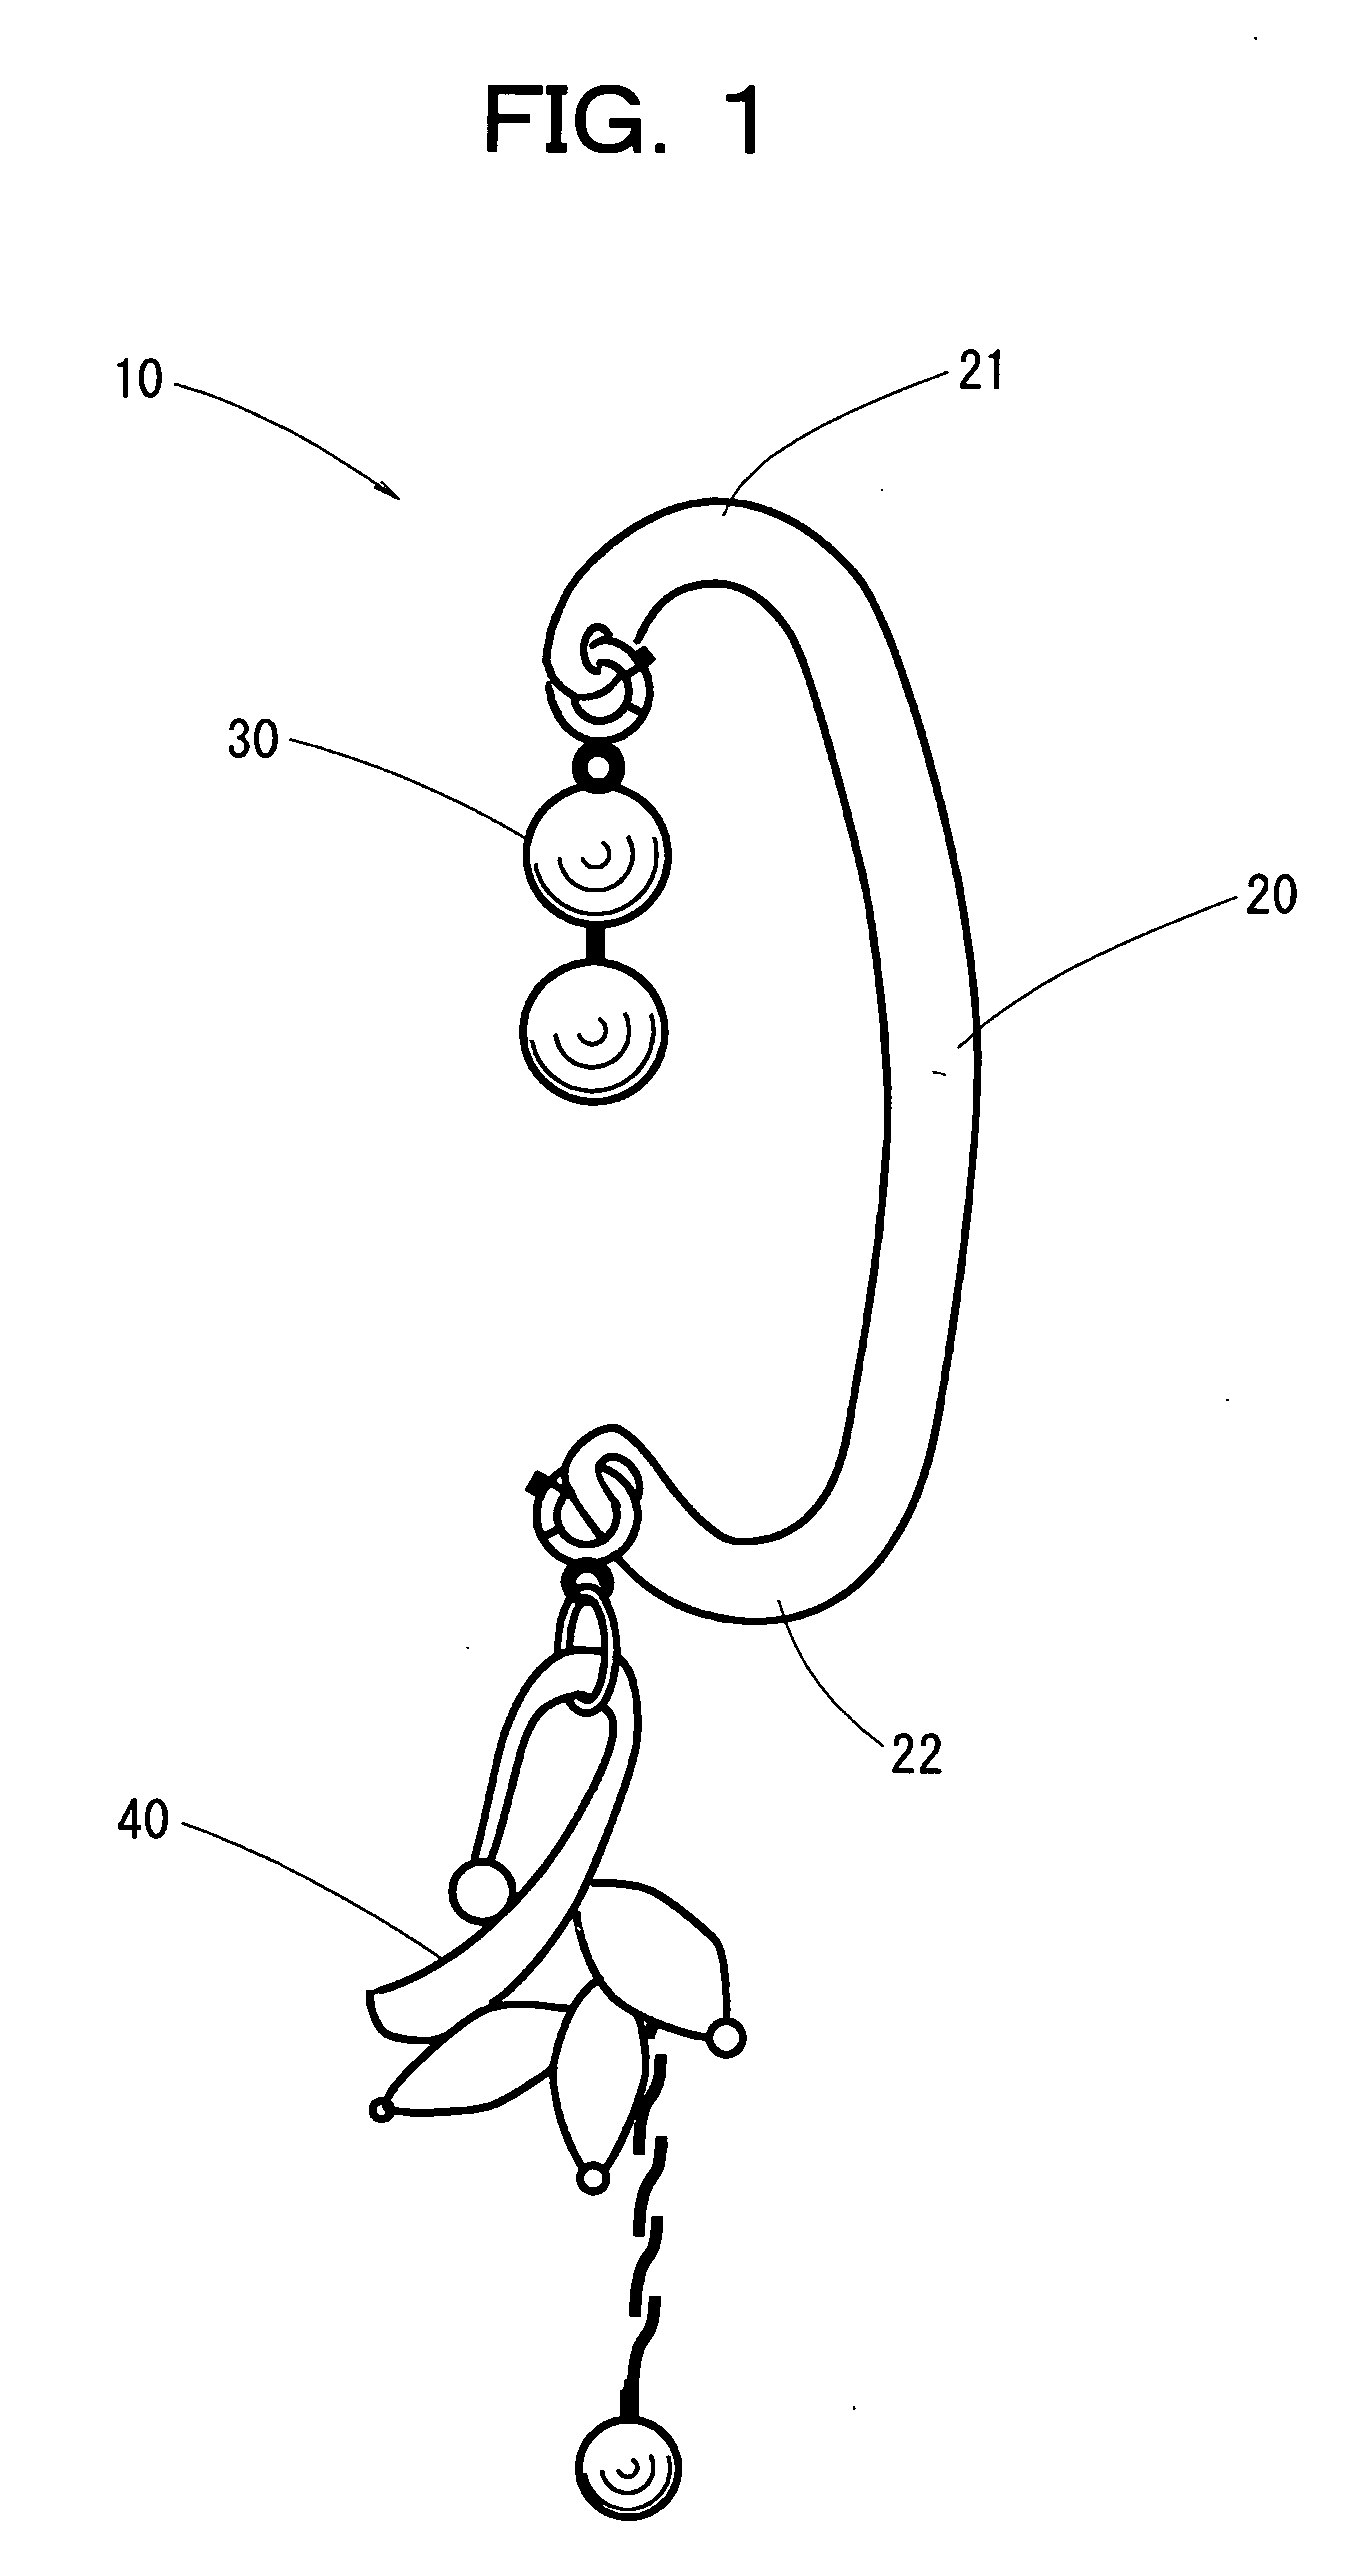 Supporting earring along root of ear